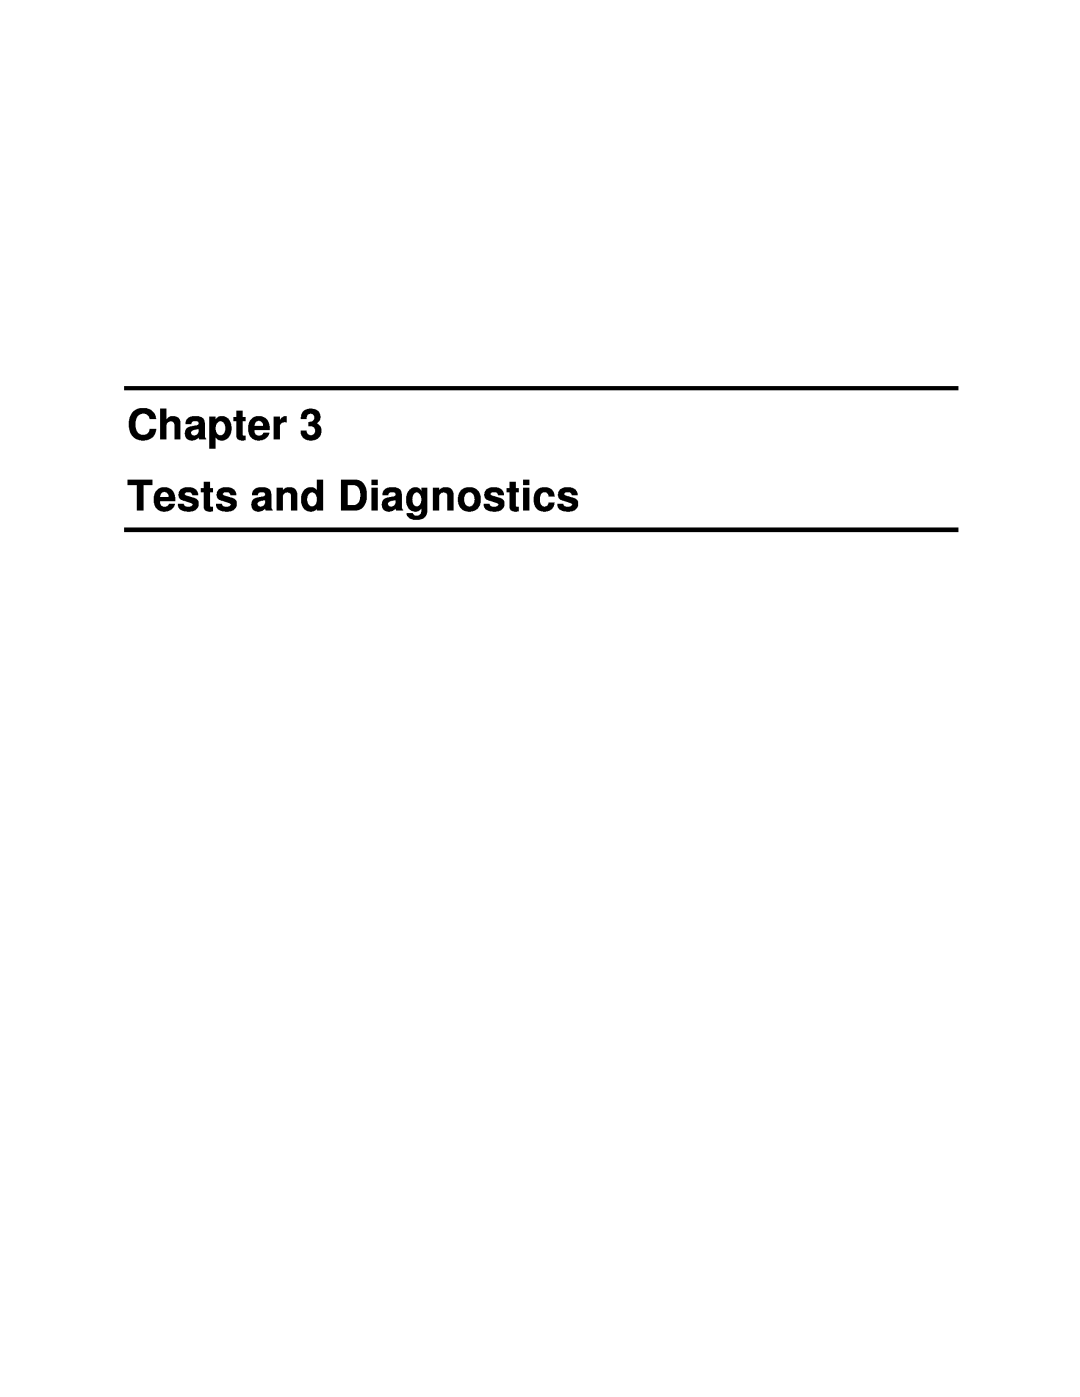 Toshiba S2 manual Chapter Tests and Diagnostics 